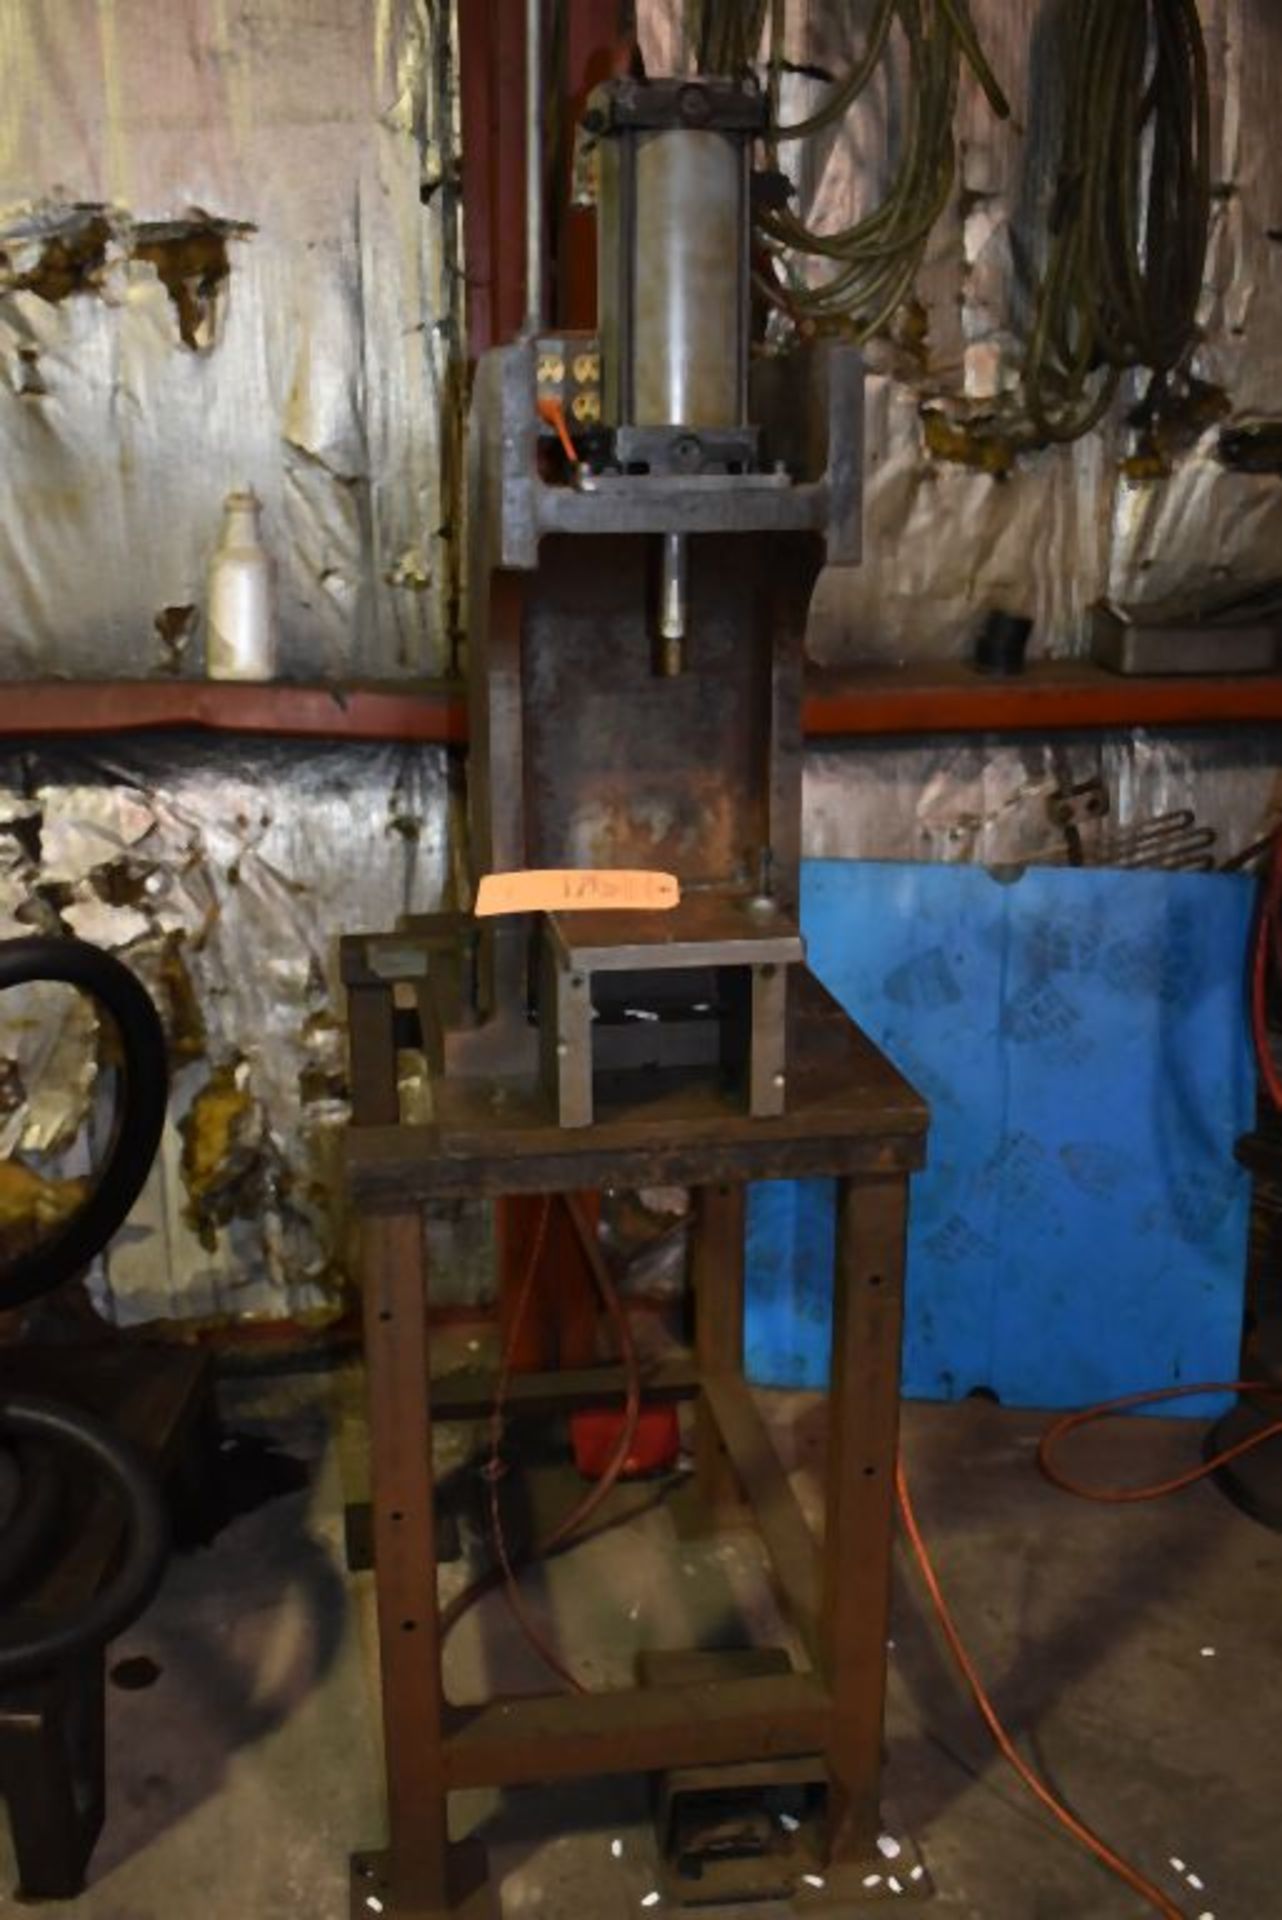 ELECTRIC AIR PRESS ON STAND